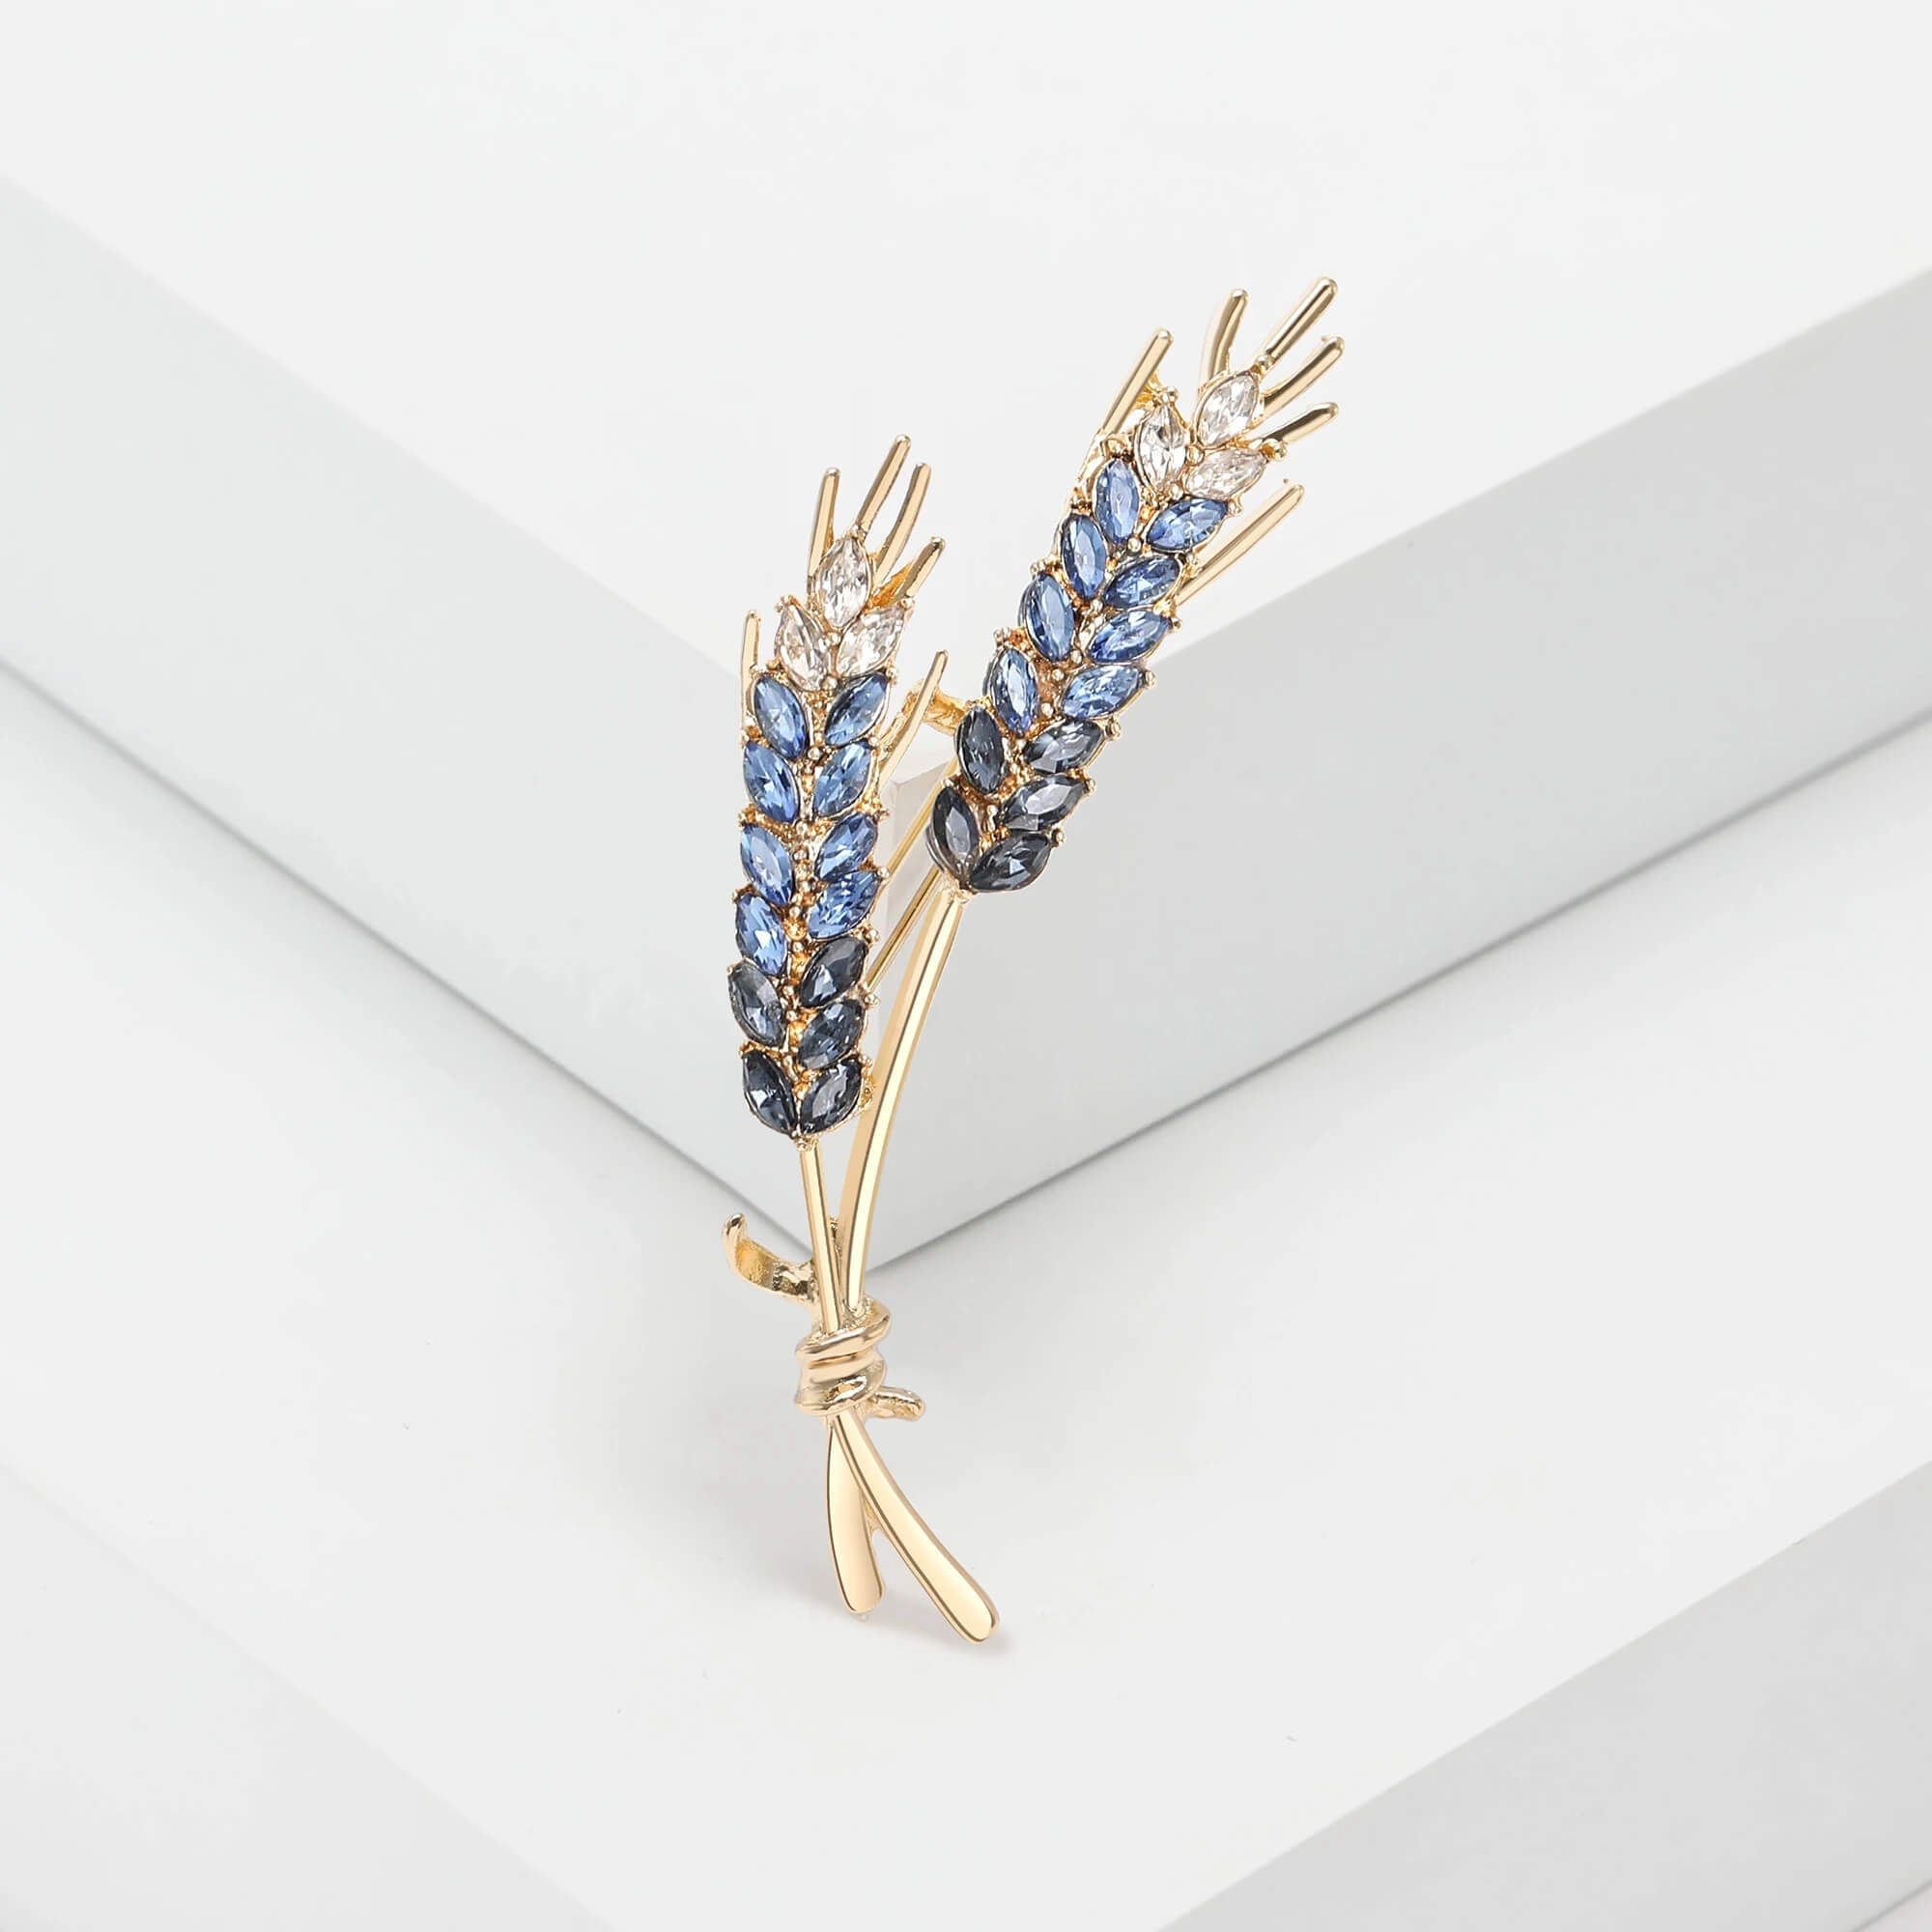 Two Gold-Toned Straws Brooch With Simulated Gemstones in Blue - Mounteen